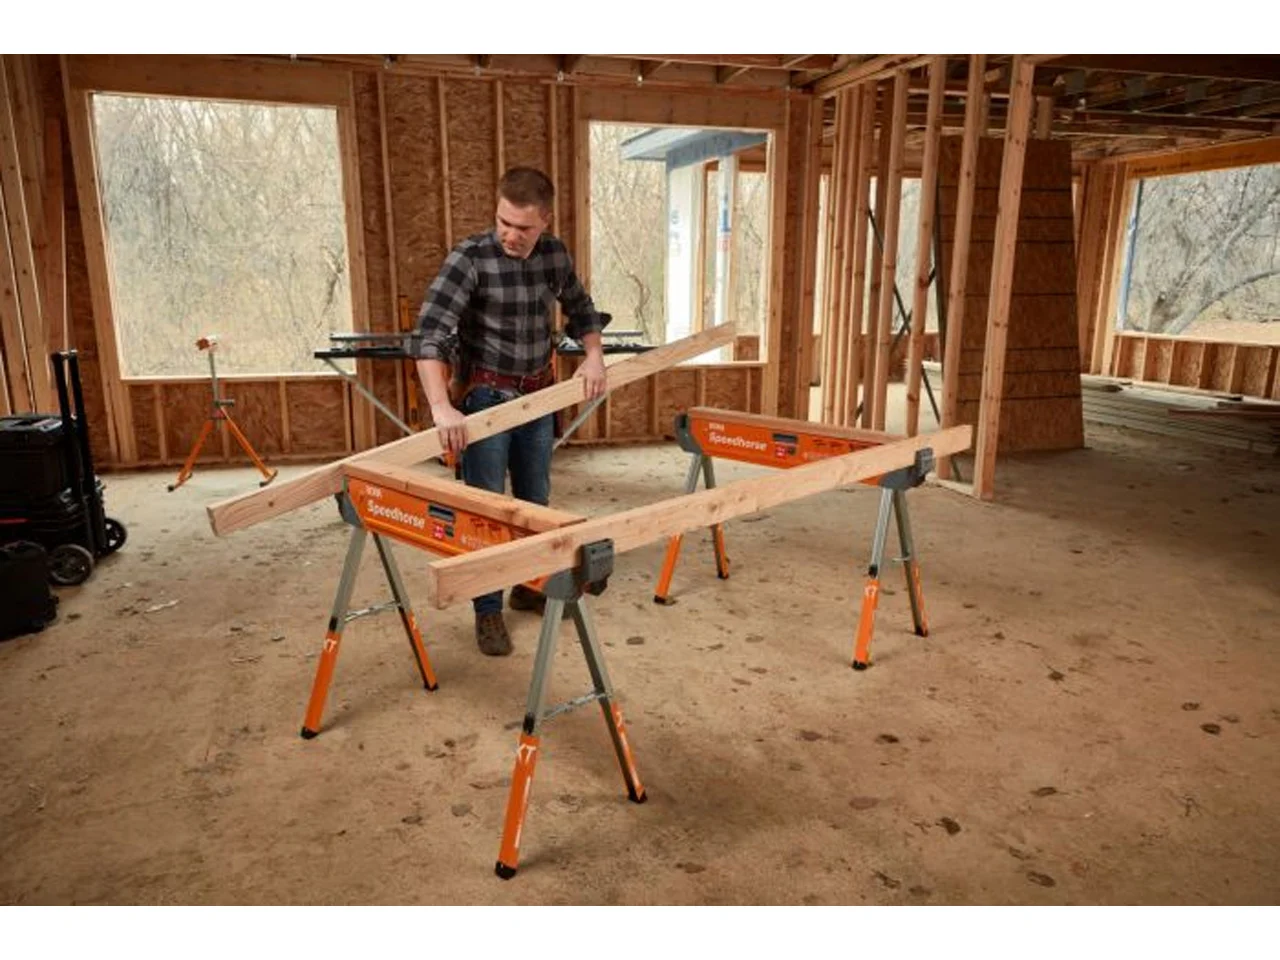 Black and Decker WM825 Plus Dual Height Deluxe Workmate